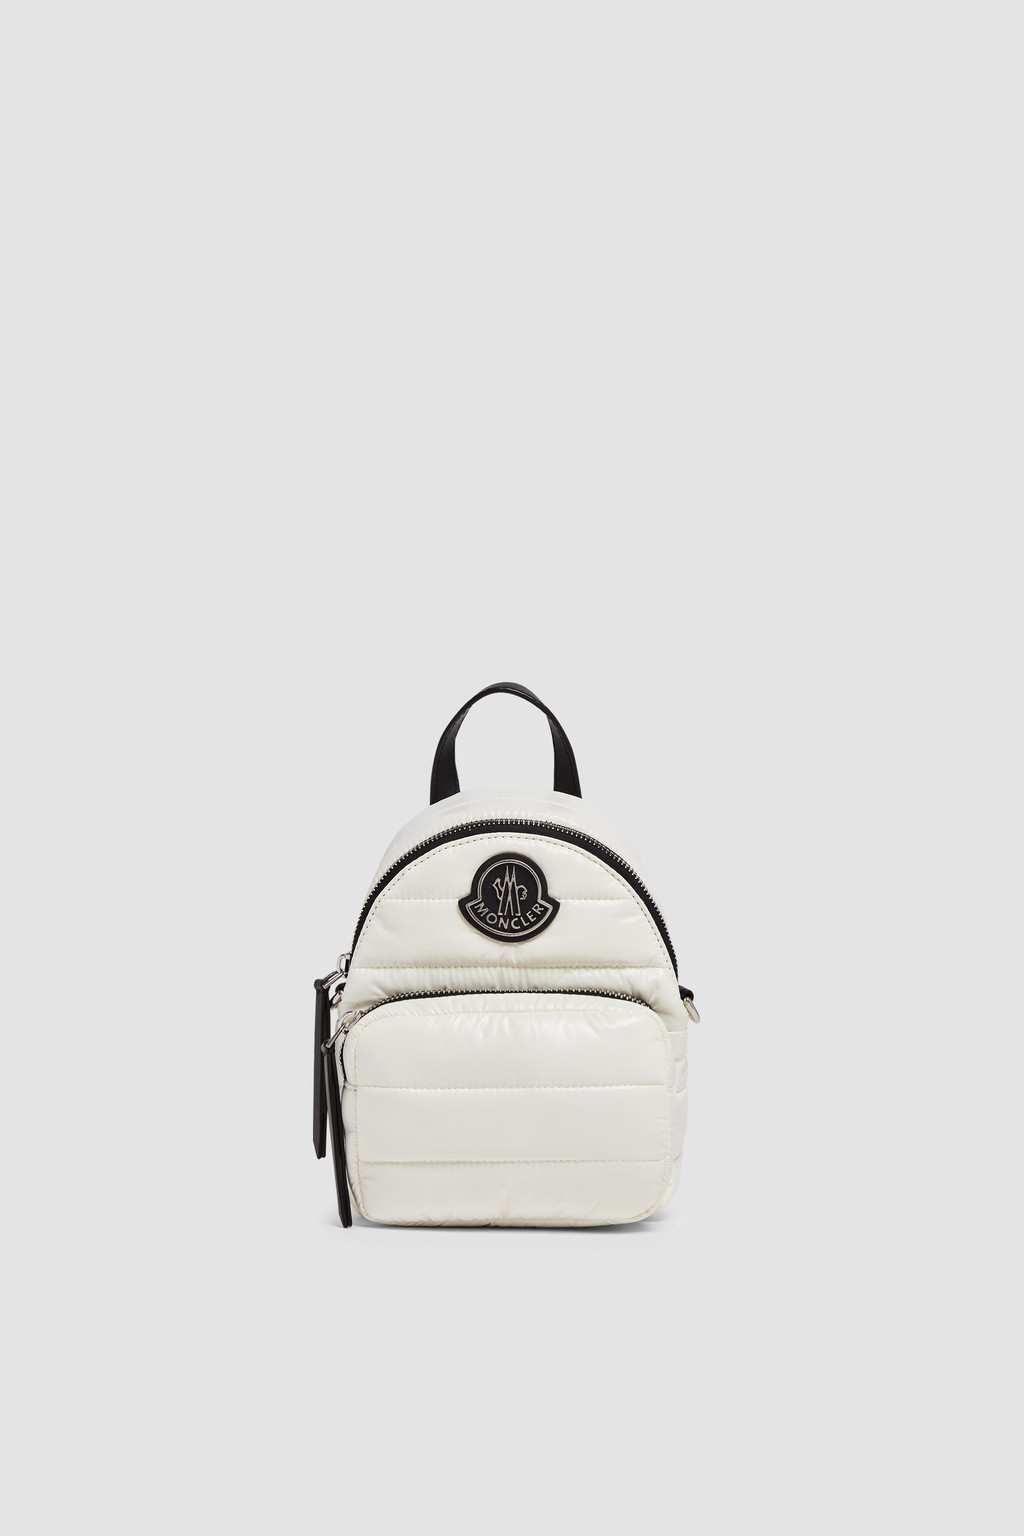 Bags & Small Accessories for Women - Accessories | Moncler JP